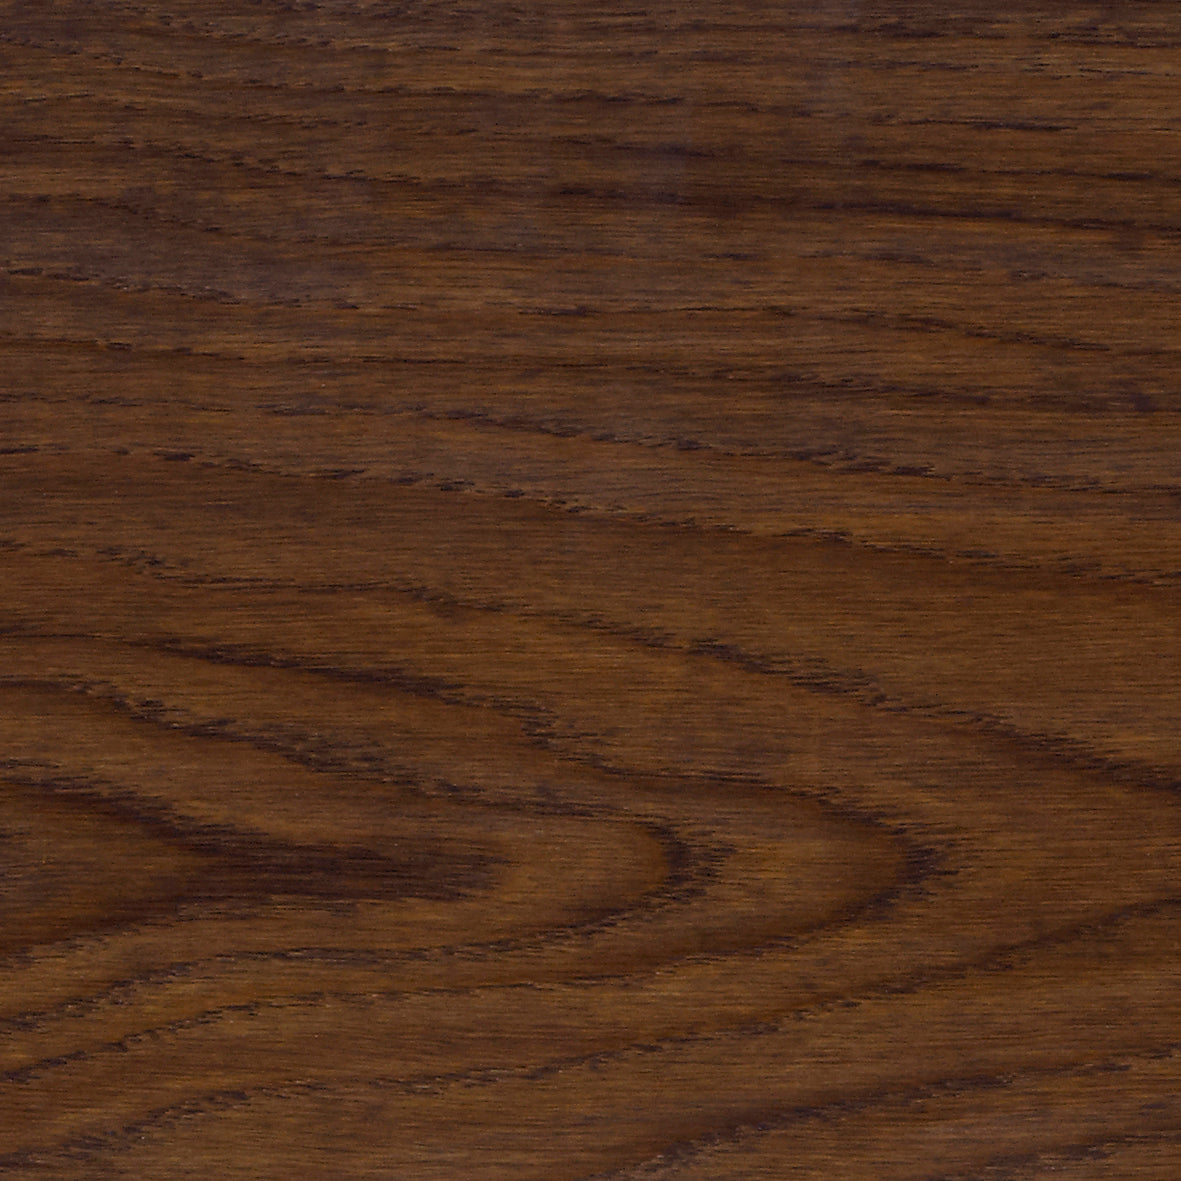 Rubio Monocoat 2C (A + B) - A&M Wood Specialty